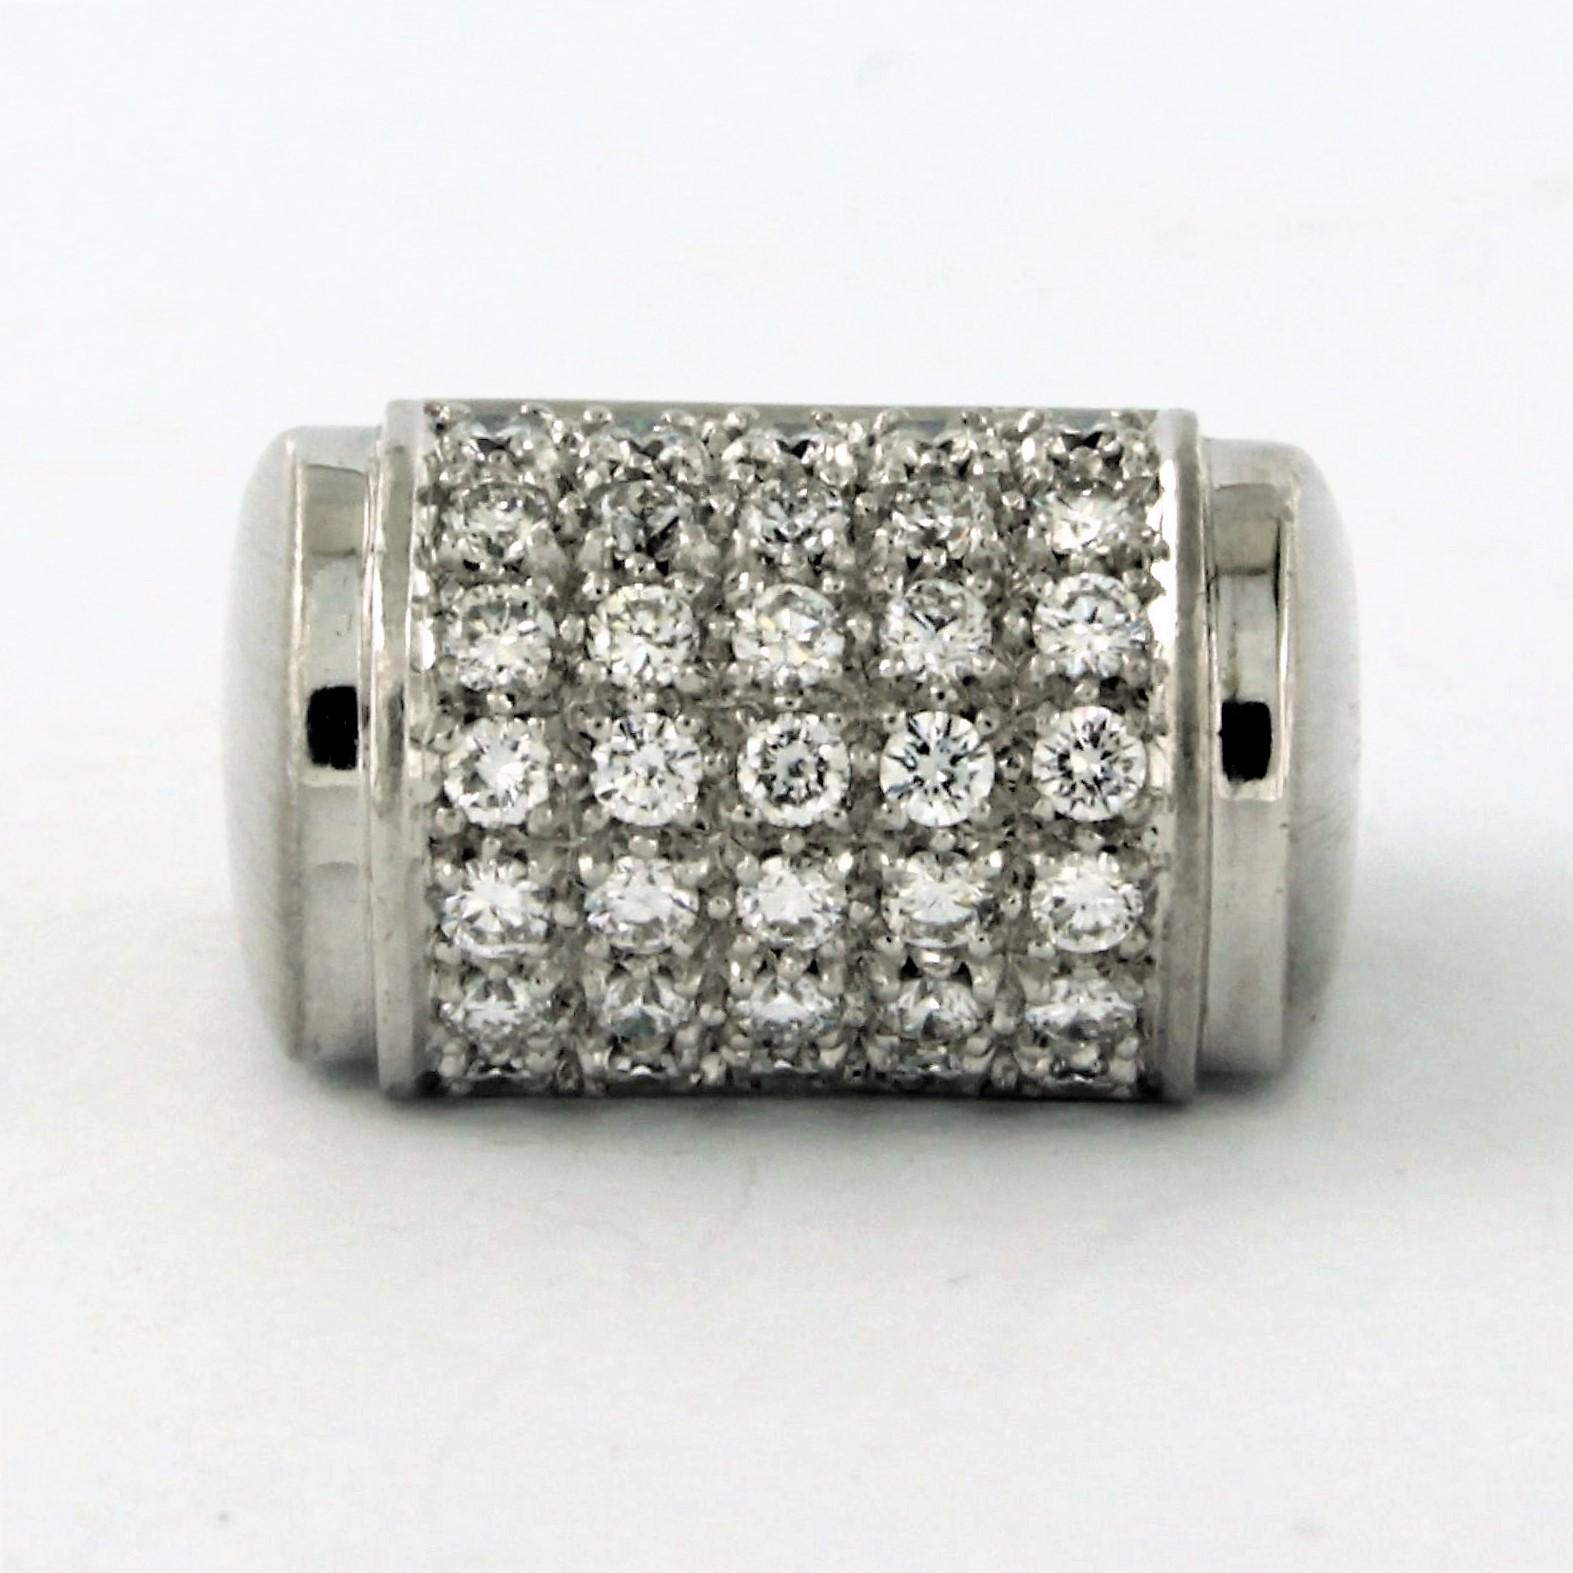 14k white gold ring set with brilliant cut diamonds. 1.50ct – F/G – VS/SI – ring size U.S. 8.5 - EU. 18.5(58)

Detailed description

the top of the ring is 1.3 cm wide and 8.0 mm high

Ring size US 8.5, EU. 17.25 (54), ring can be enlarged or